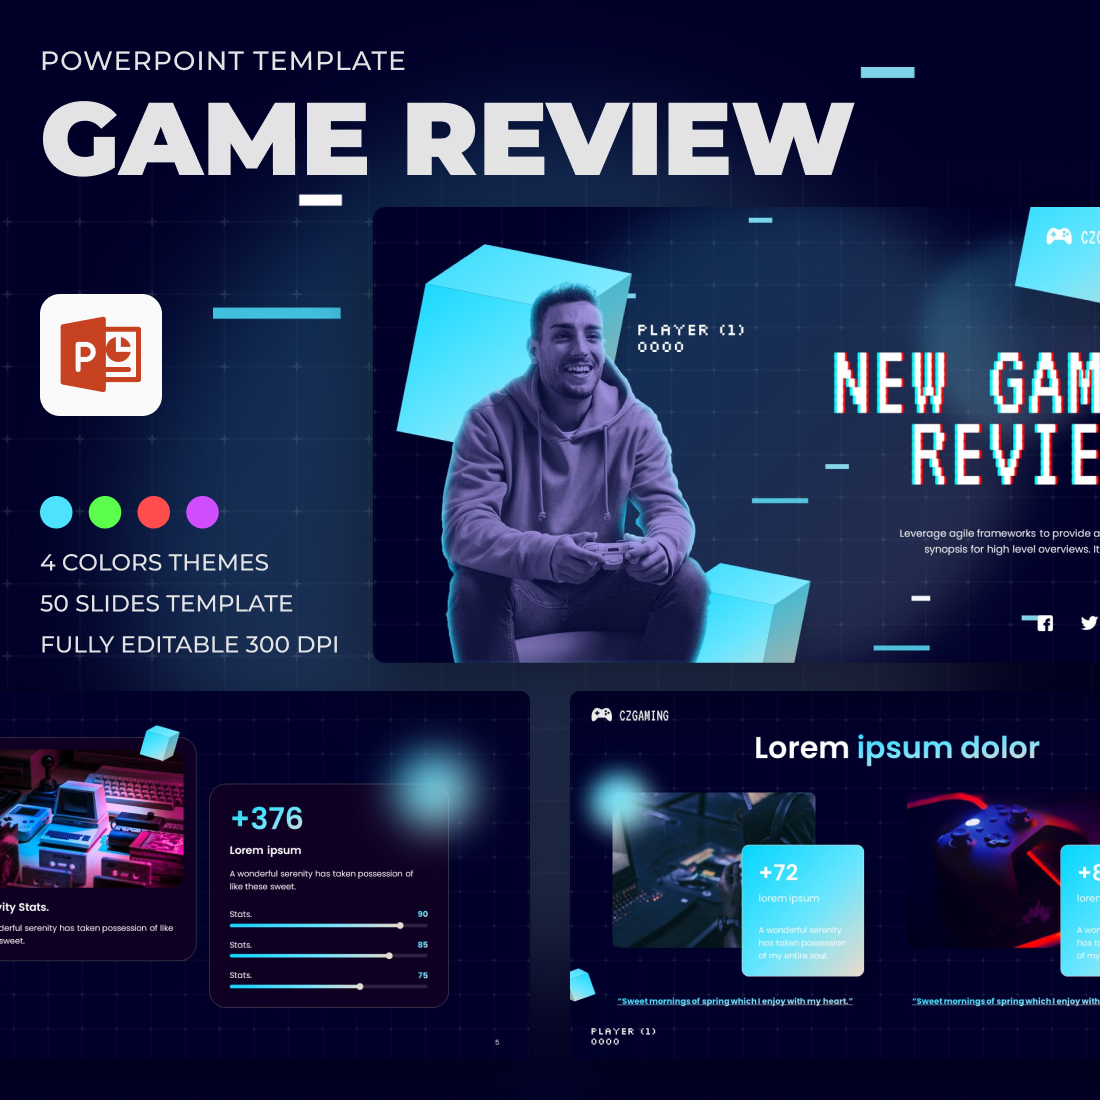 Illustrations with game review powerpoint template.